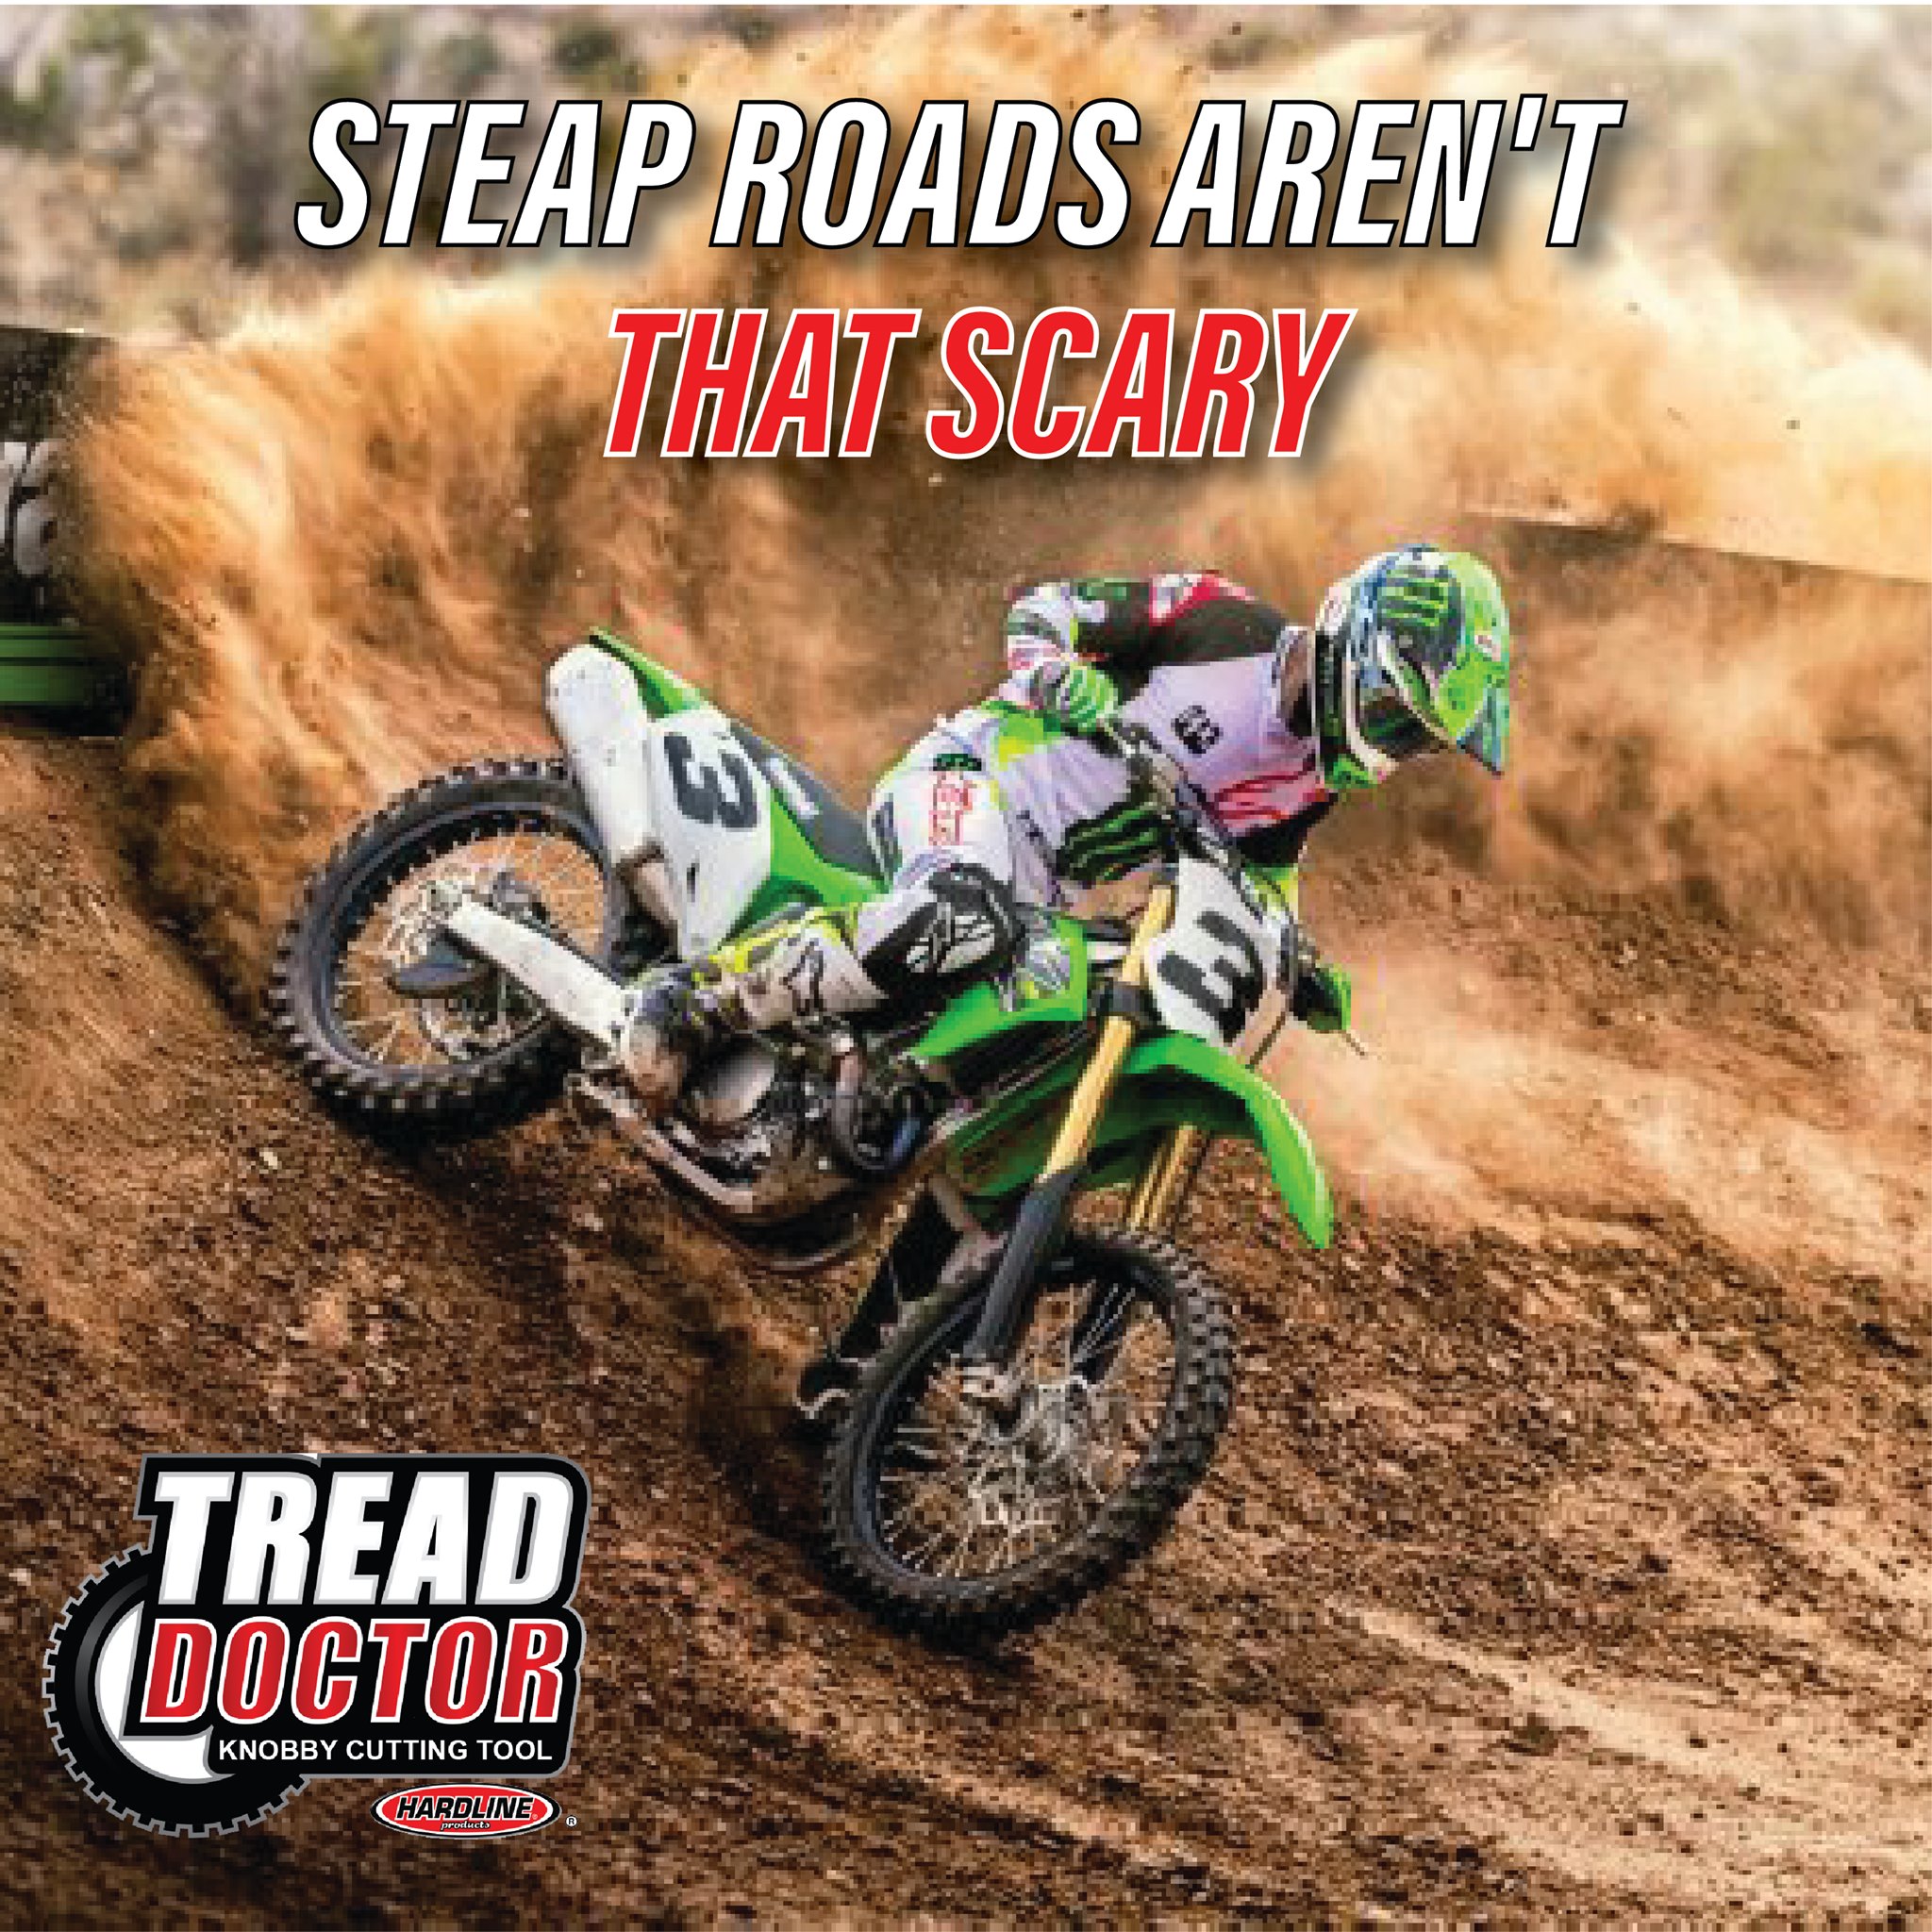 You can trust your wheels on any steap down. It's solid and poweful with Tread Doctor.